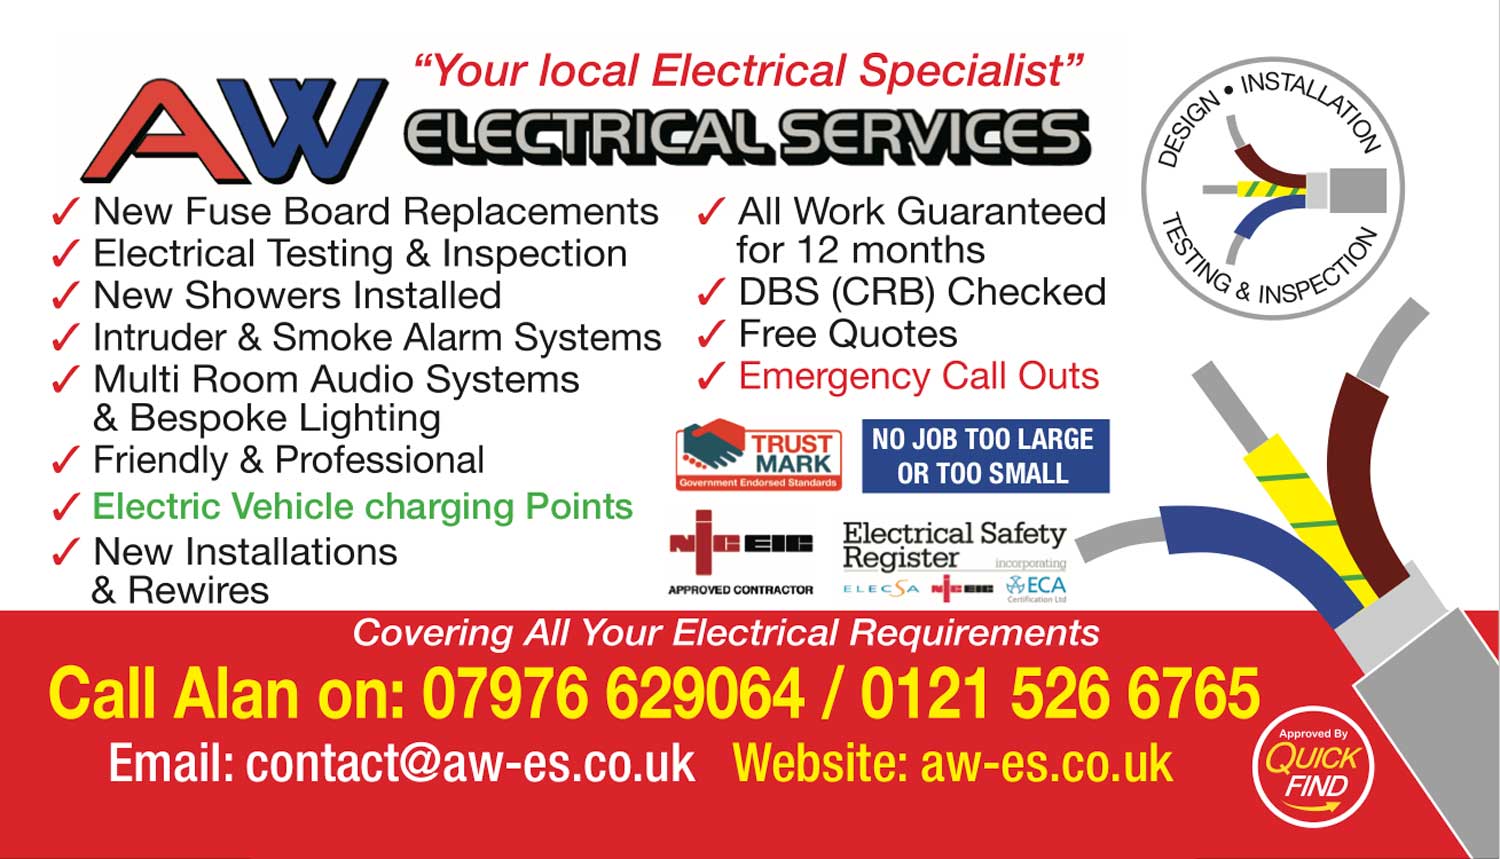 https://quickfinddirectories.co.uk/wp-content/uploads/2022/09/aw-electrical-services-web.jpg